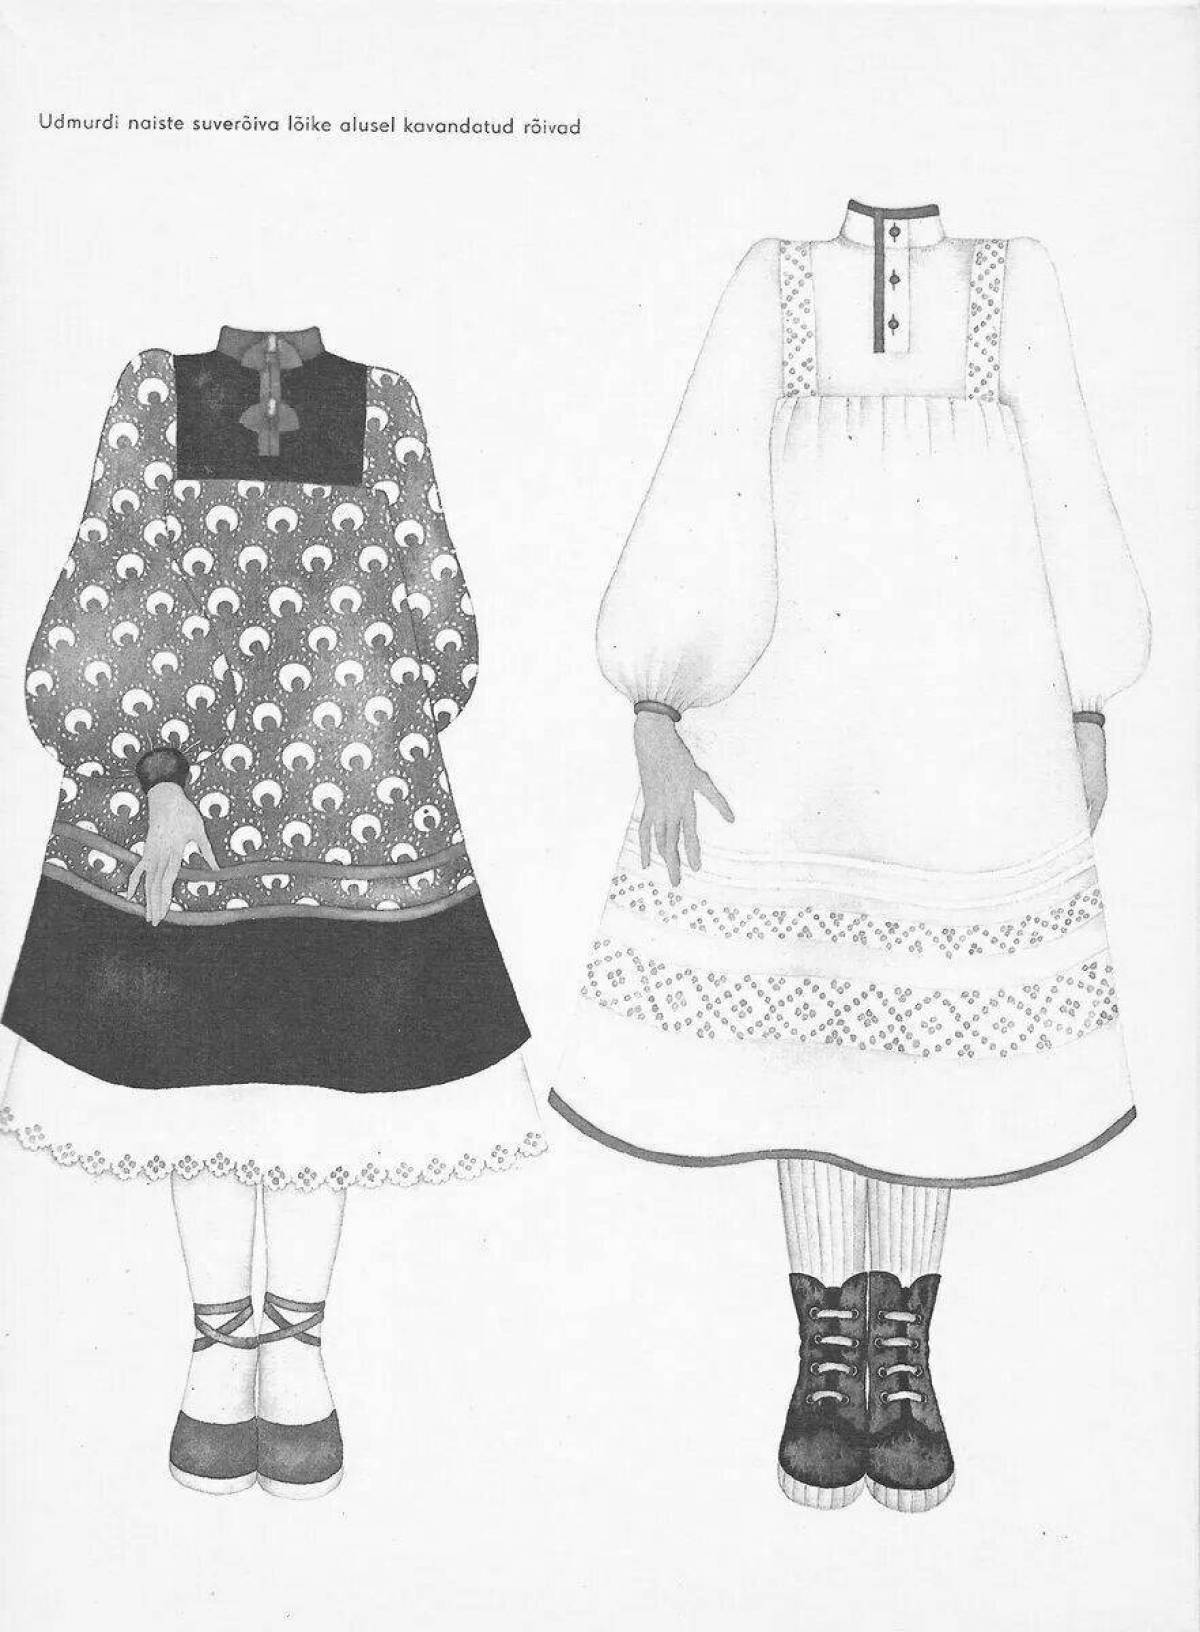 Coloring page dramatic Udmurt national costume